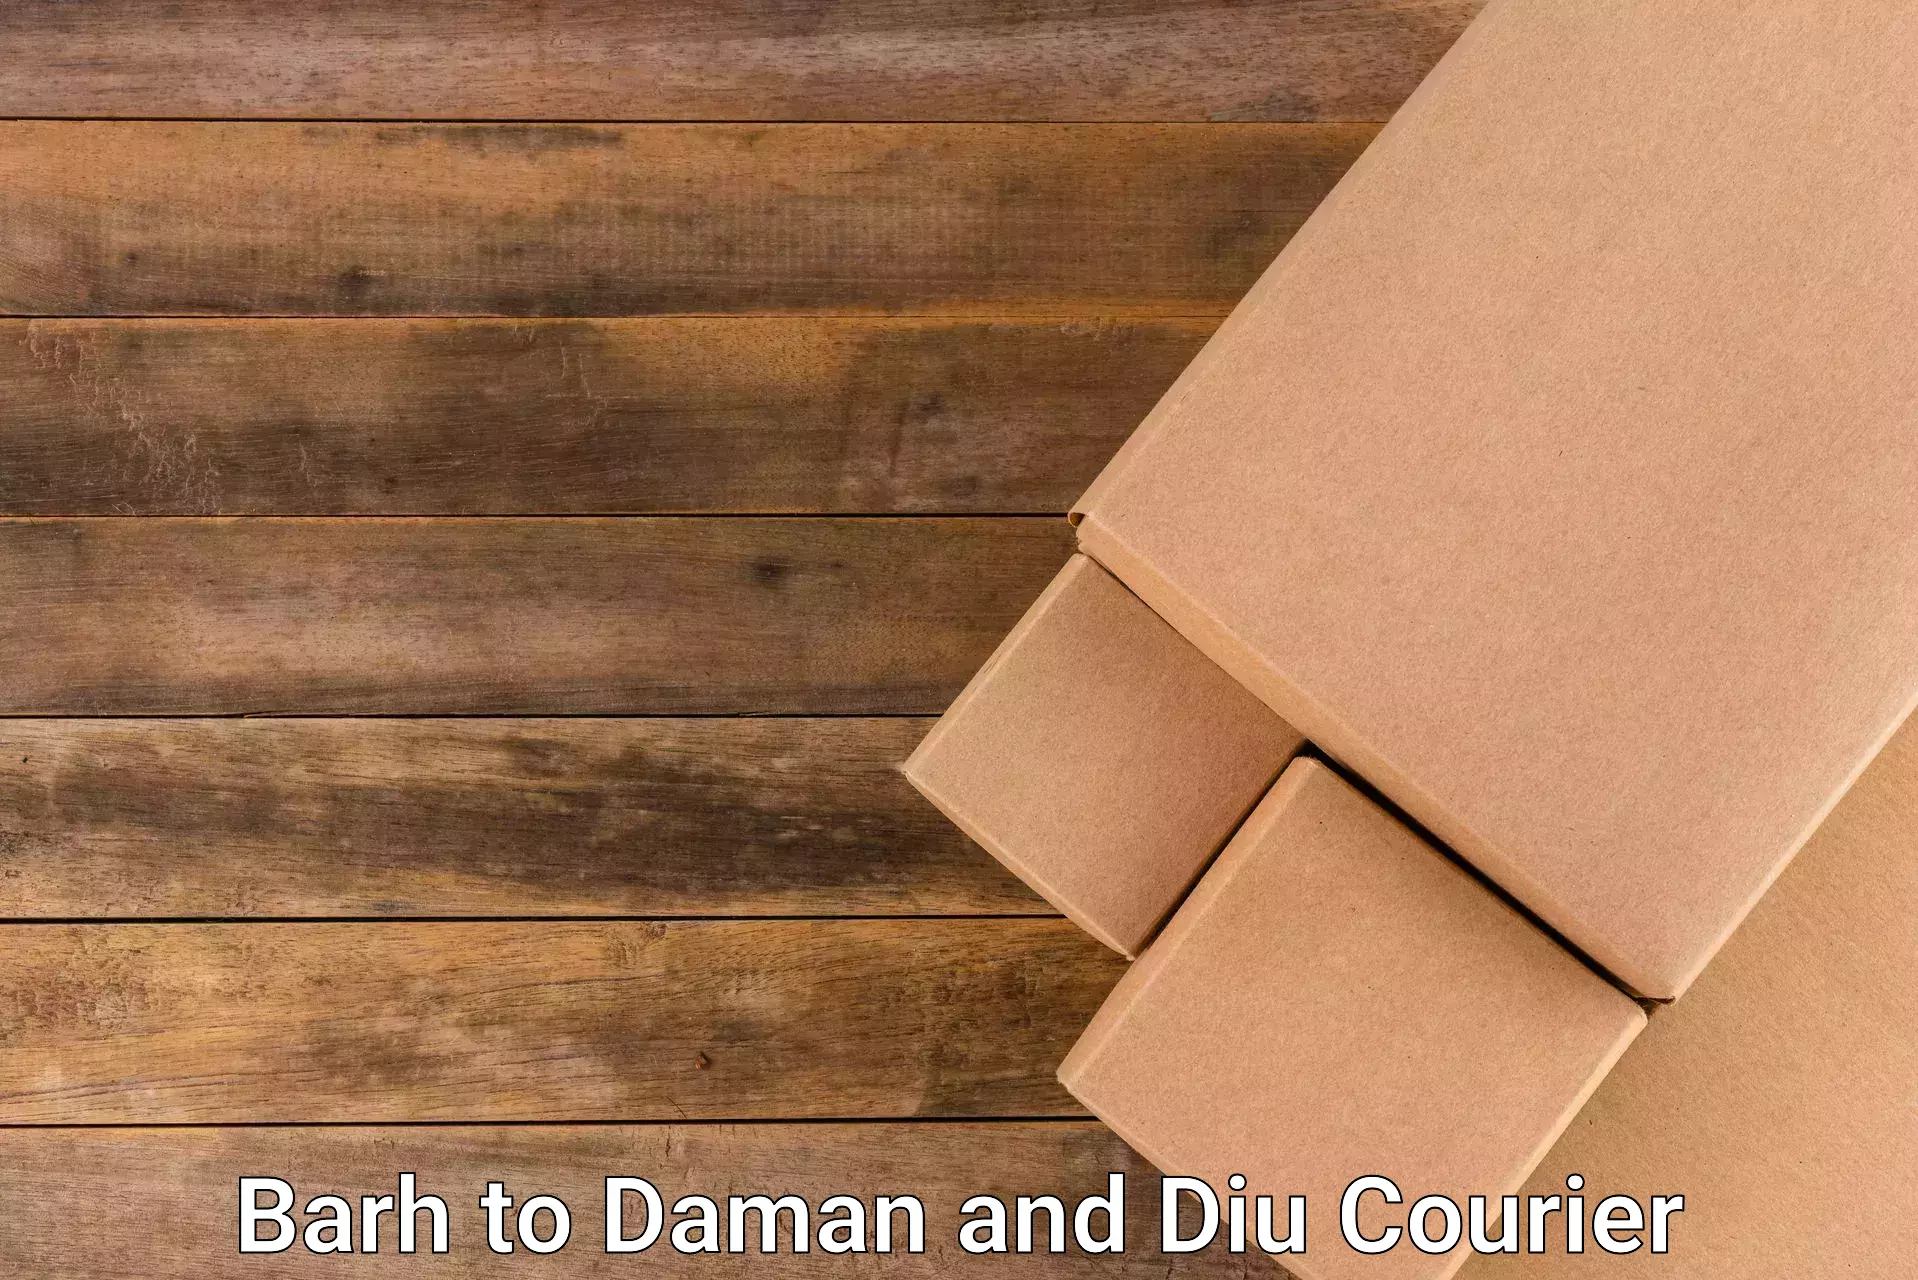 Express delivery solutions Barh to Daman